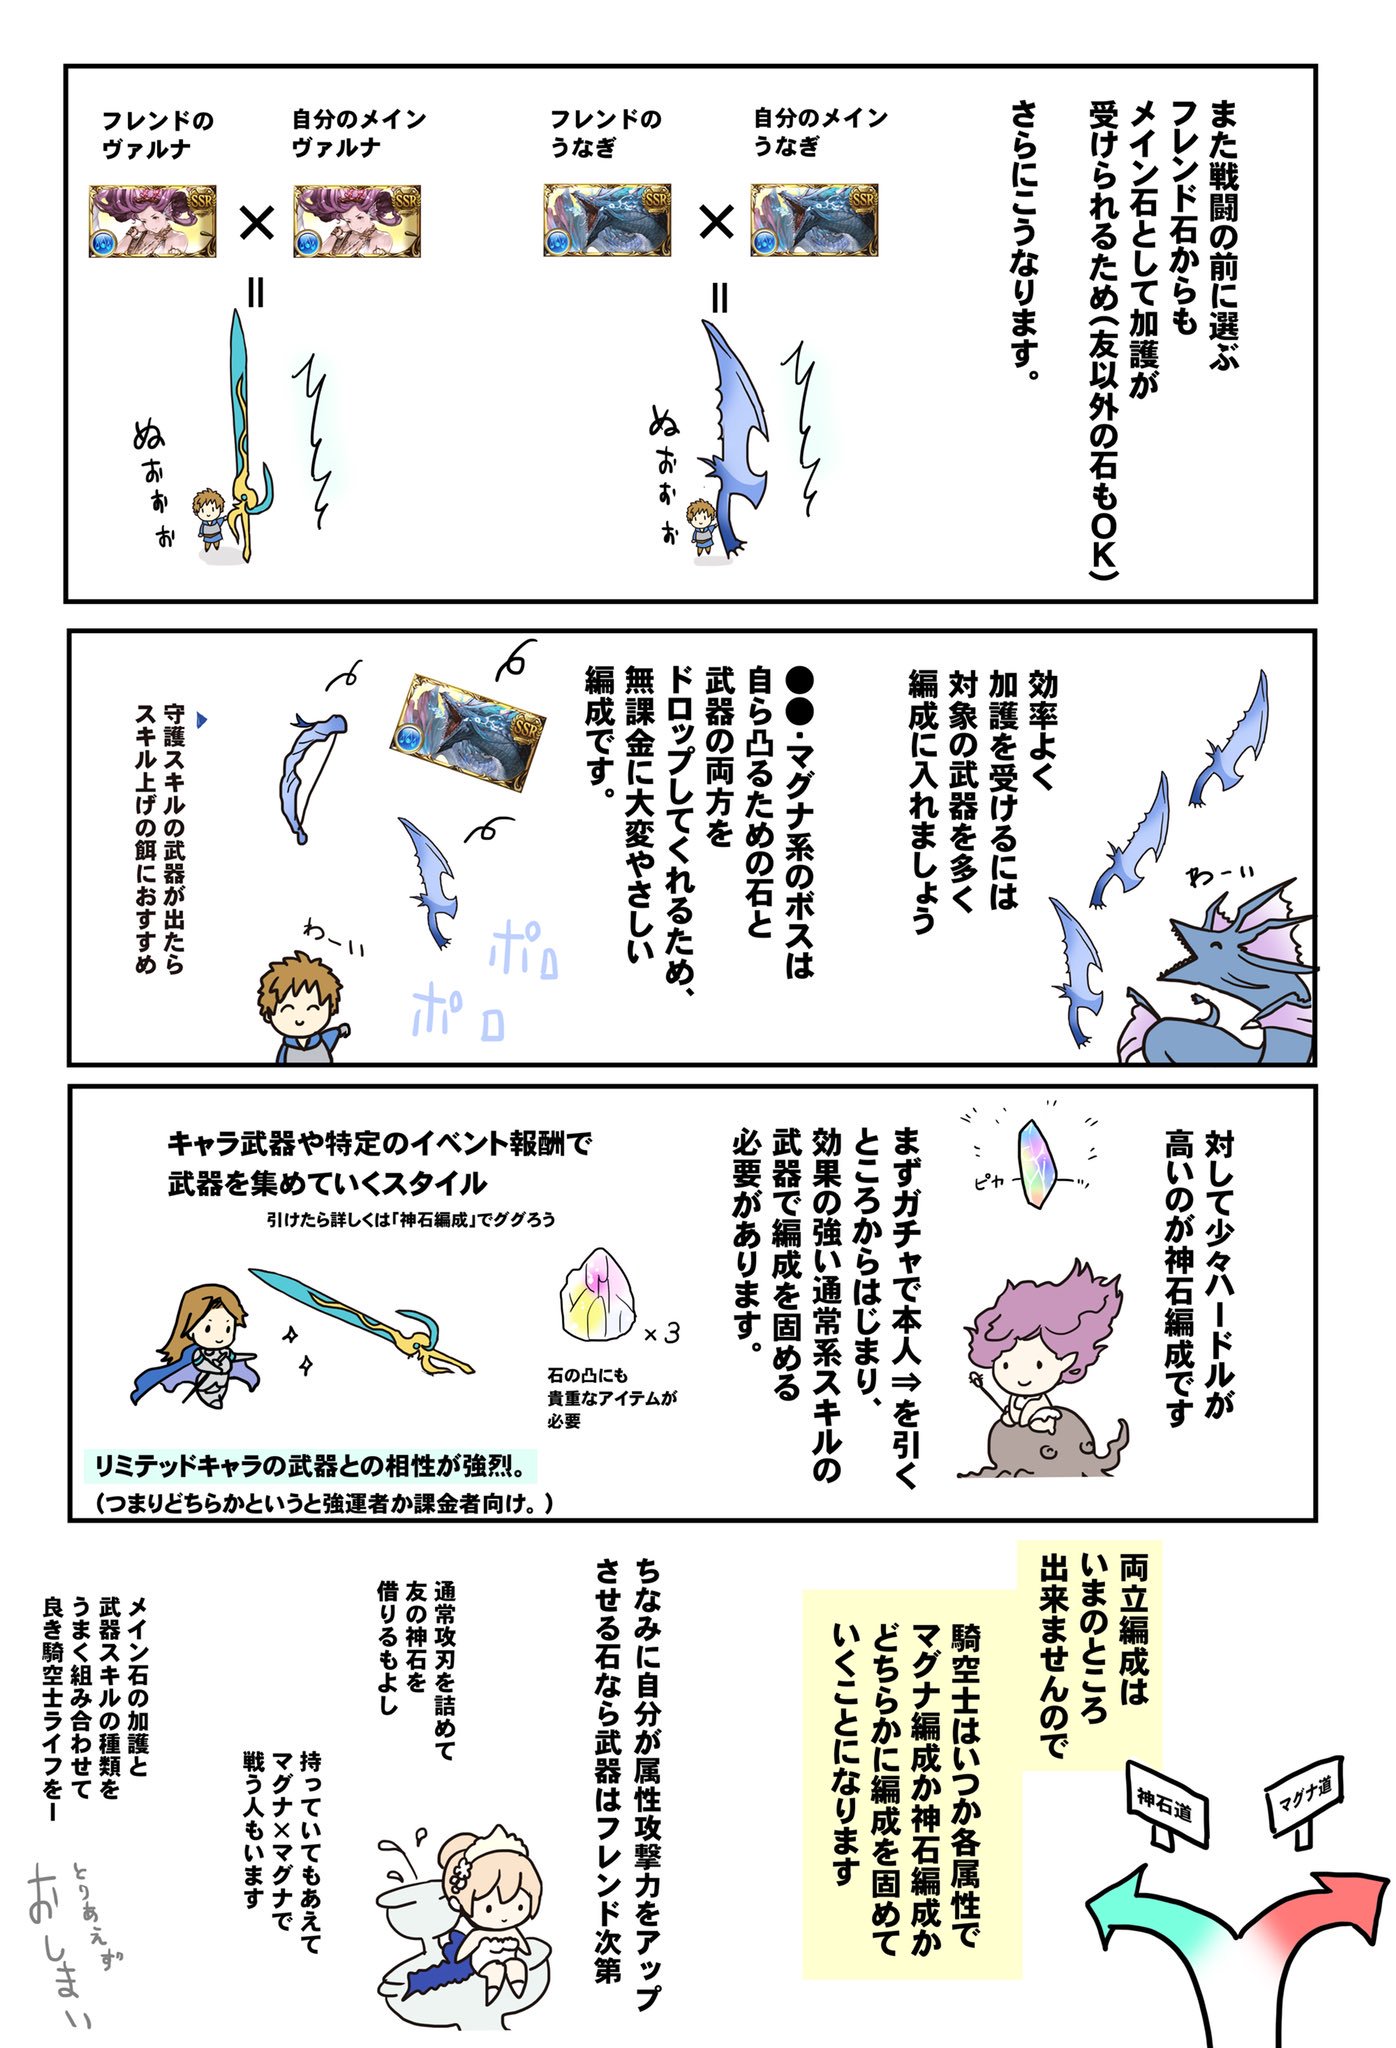 Granblue En Unofficial With Permission From 1218tk28 We Have Translated Their Cute Guide On Matching Summons To Grids The Artist Noted In Their Tweet That It Favored Being Easy To